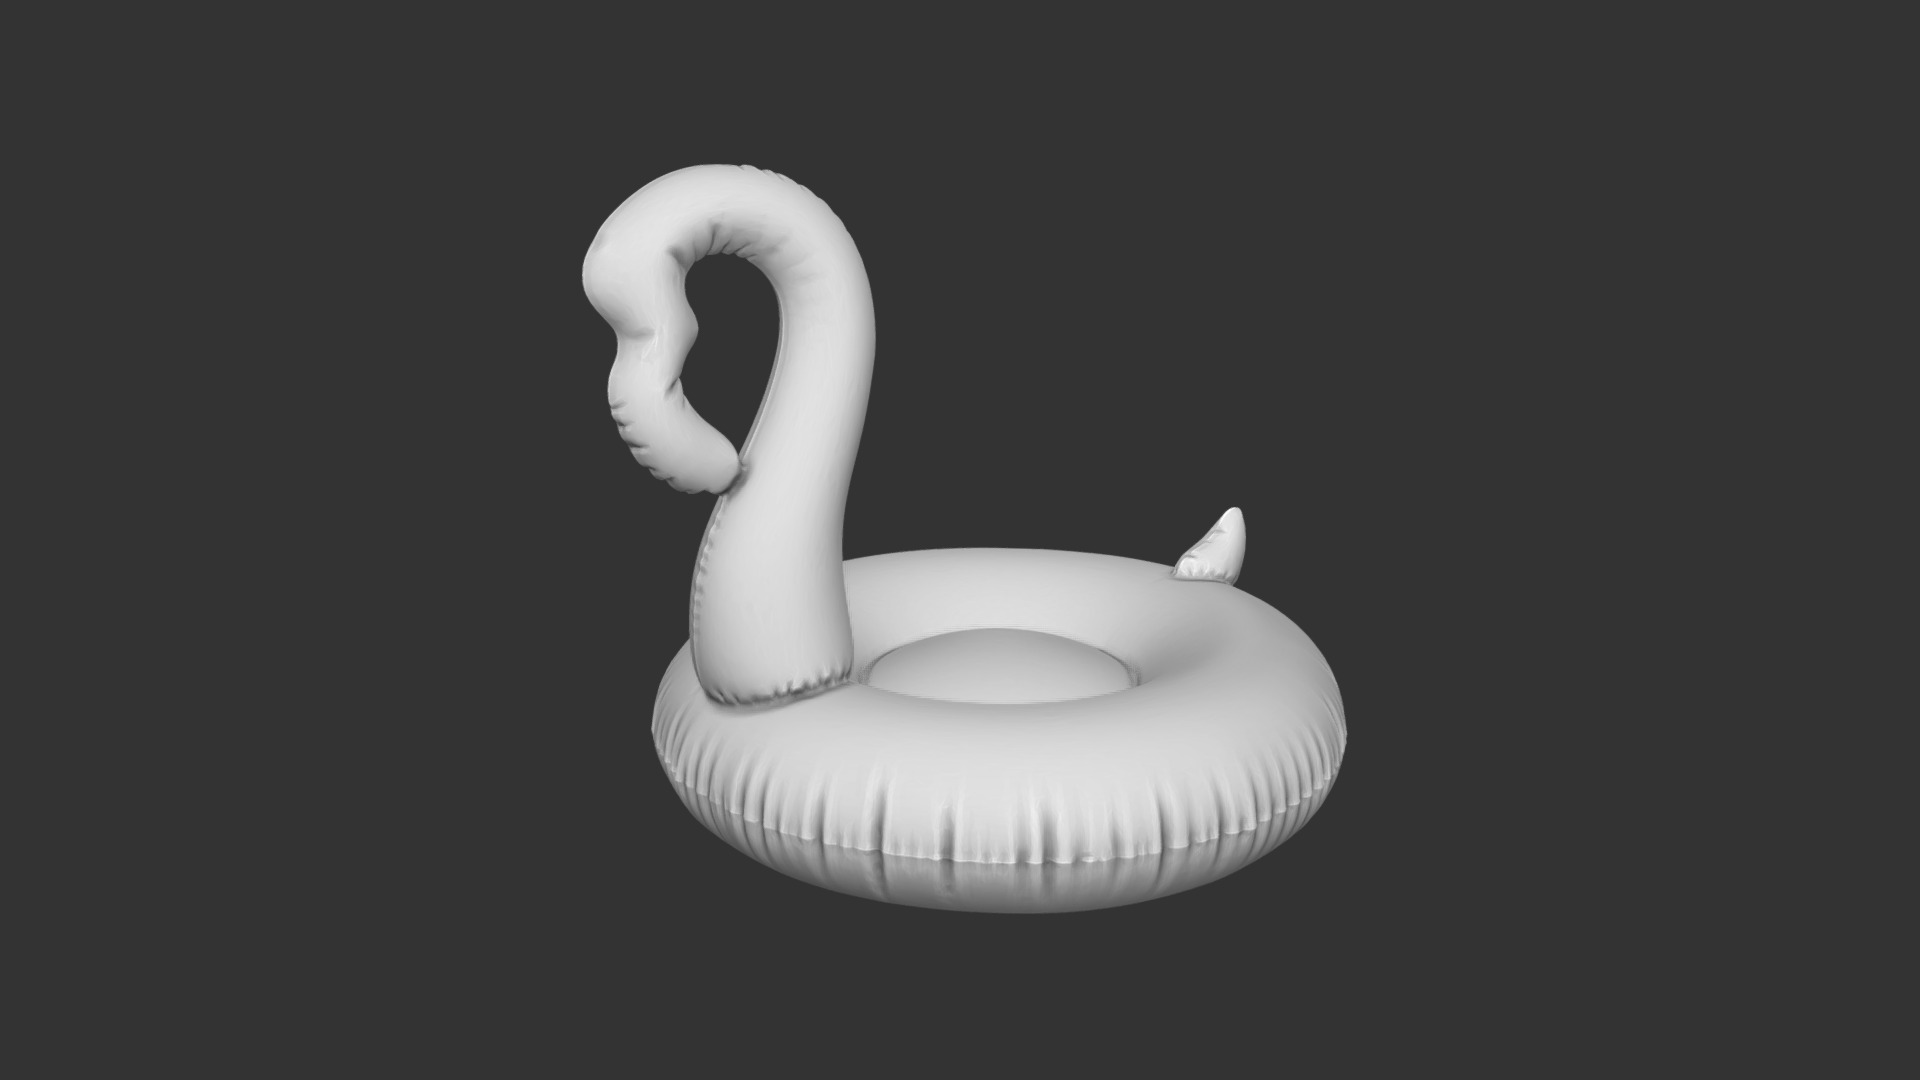 3D model Flamingo Pool Toy – 3D print - This is a 3D model of the Flamingo Pool Toy - 3D print. The 3D model is about a white toilet bowl.